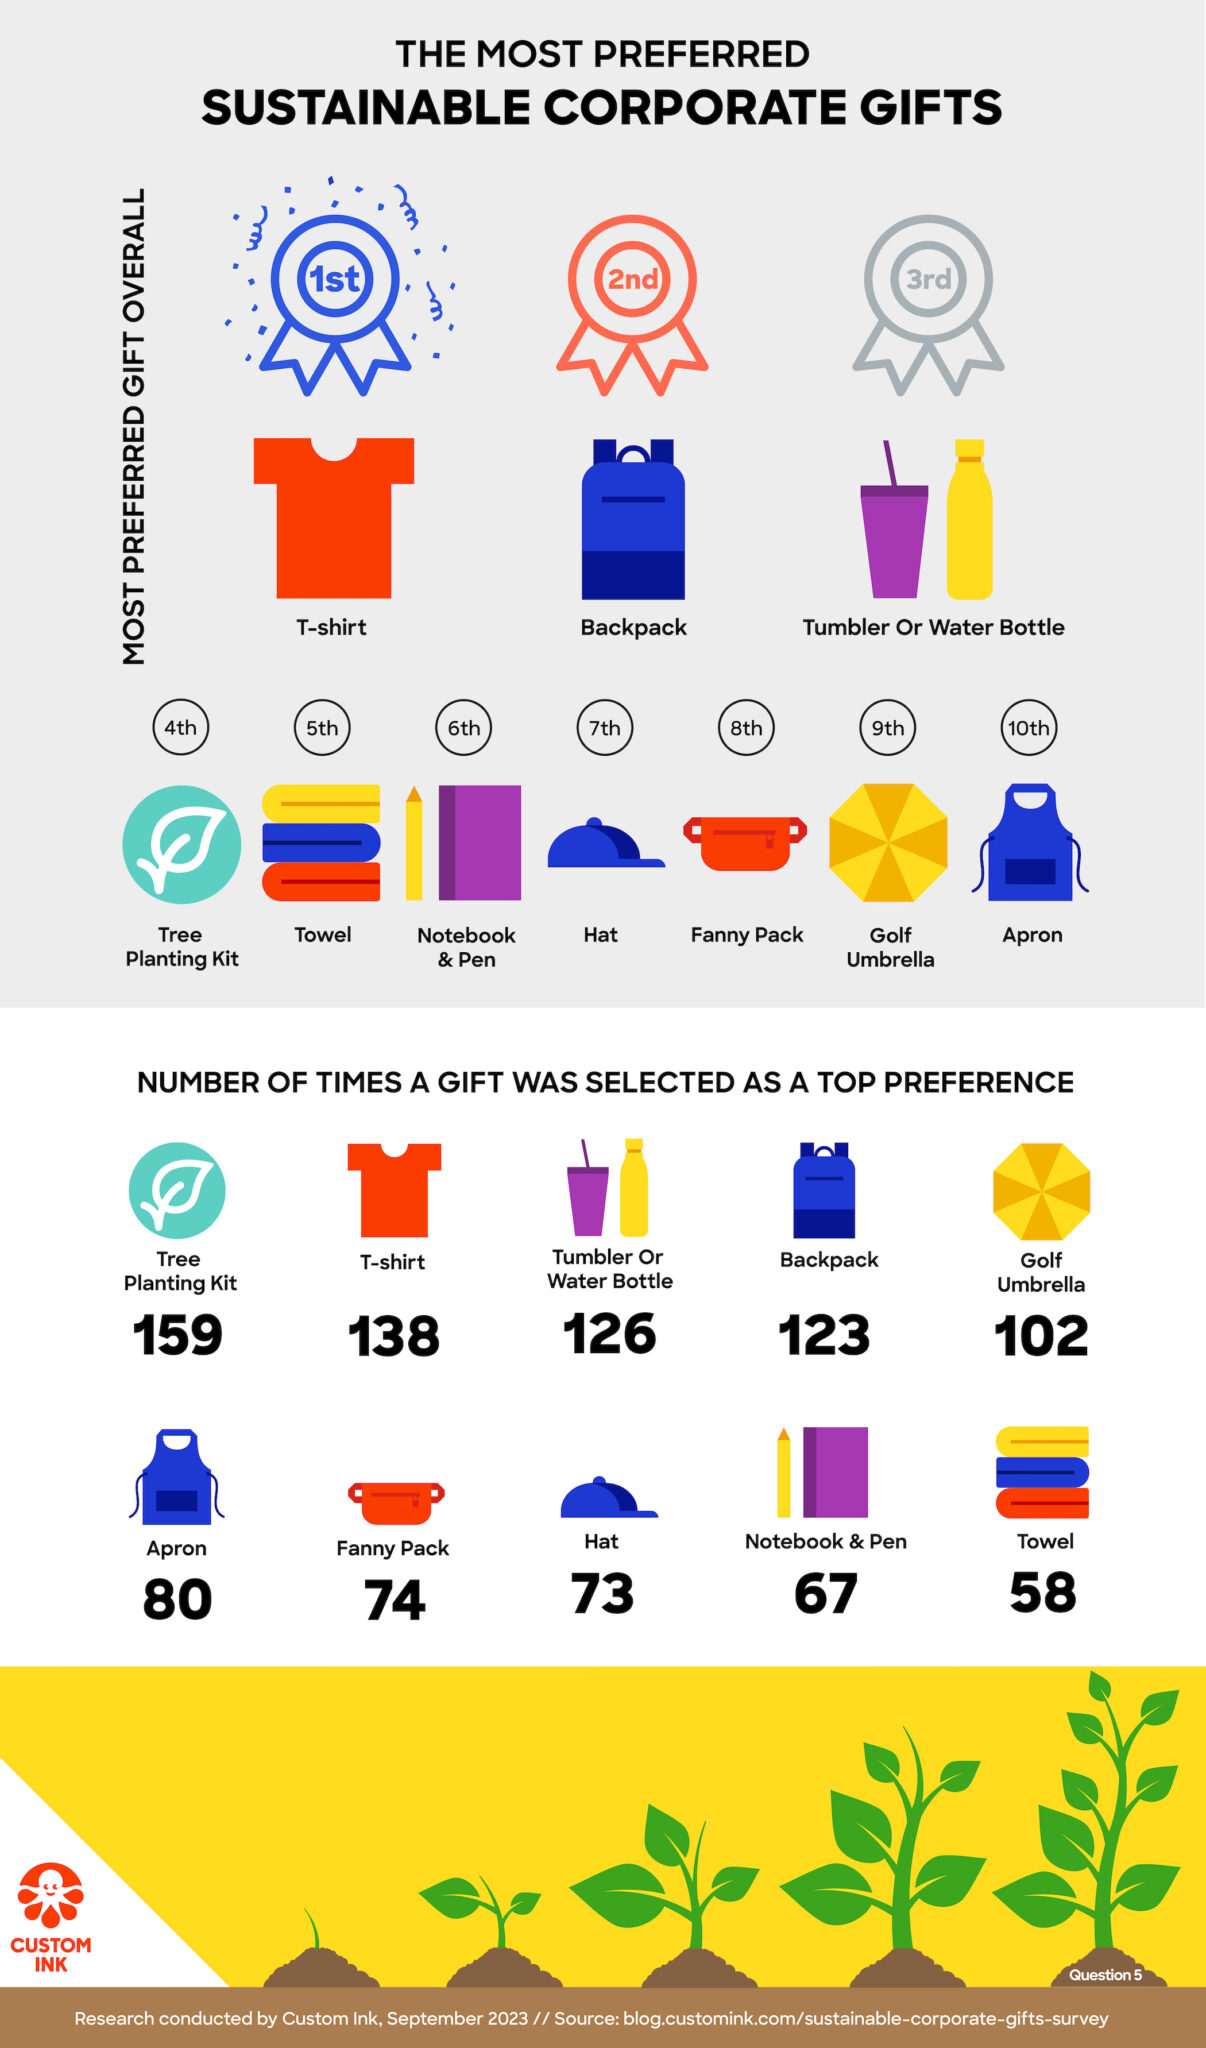 An infographic titled “The Most Preferred Sustainable Corporate Gifts.” 1st: T-shirt 2nd: Backpack 3rd: Tumbler or Water Bottle #4: Tree Planting Kit #5: Towel #6: Notebook & Pen #7: Hat #8: Fanny Pack #9: Golf Umbrella #10: Apron Another section below displays the number of times a gift was selected as a top preference. Tree Planting Kit: 159 T-shirt: 138 Tumbler or Water Bottle: 126 Backpack: 123 Golf Umbrella: 102 Apron: 80 Fanny Pack: 74 Hat: 73 Notebook & Pen: 67 Towel: 58